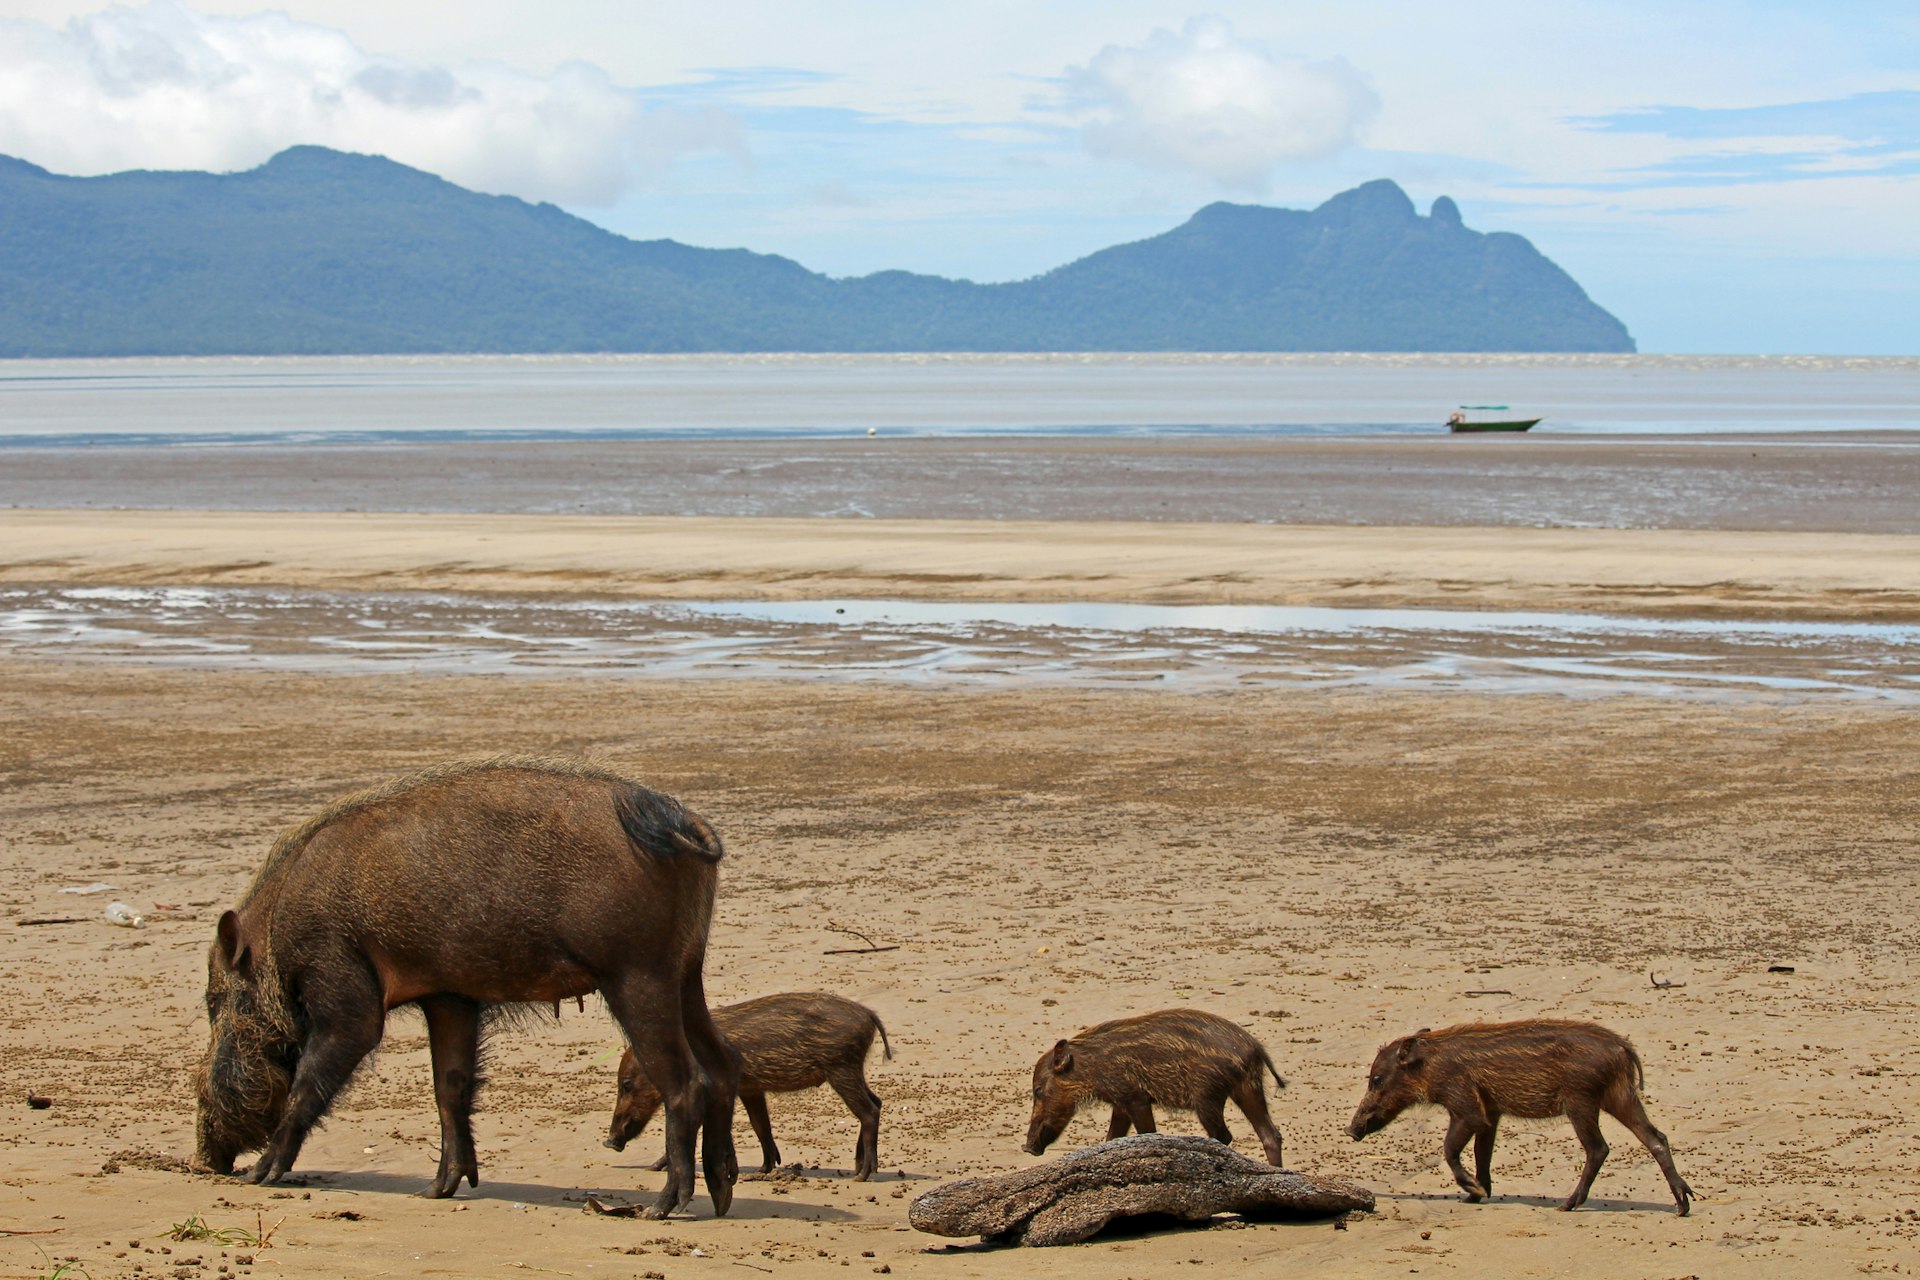 A family of beaded pigs (parent and three babies) snuffle along in the sand of a vast empty beach backed by jungle